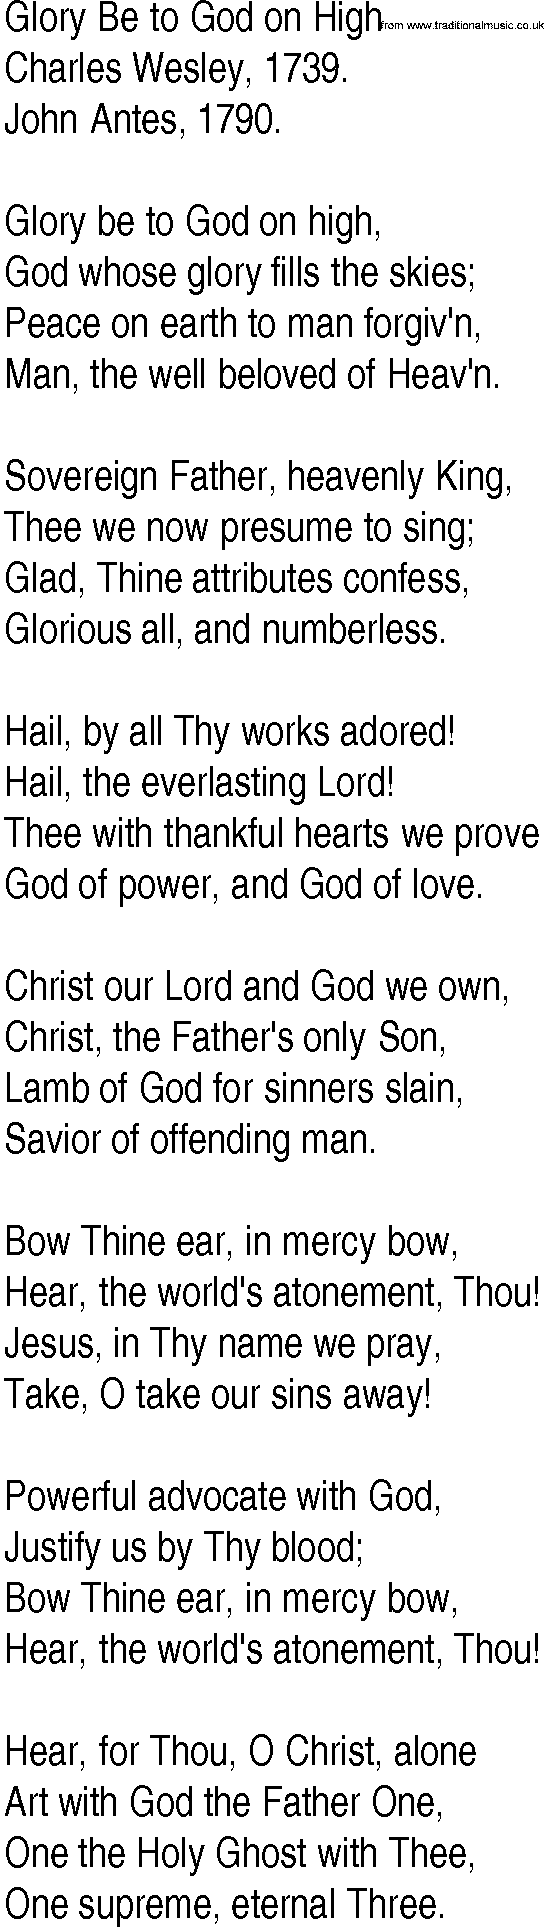 Hymn and Gospel Song: Glory Be to God on High by Charles Wesley lyrics